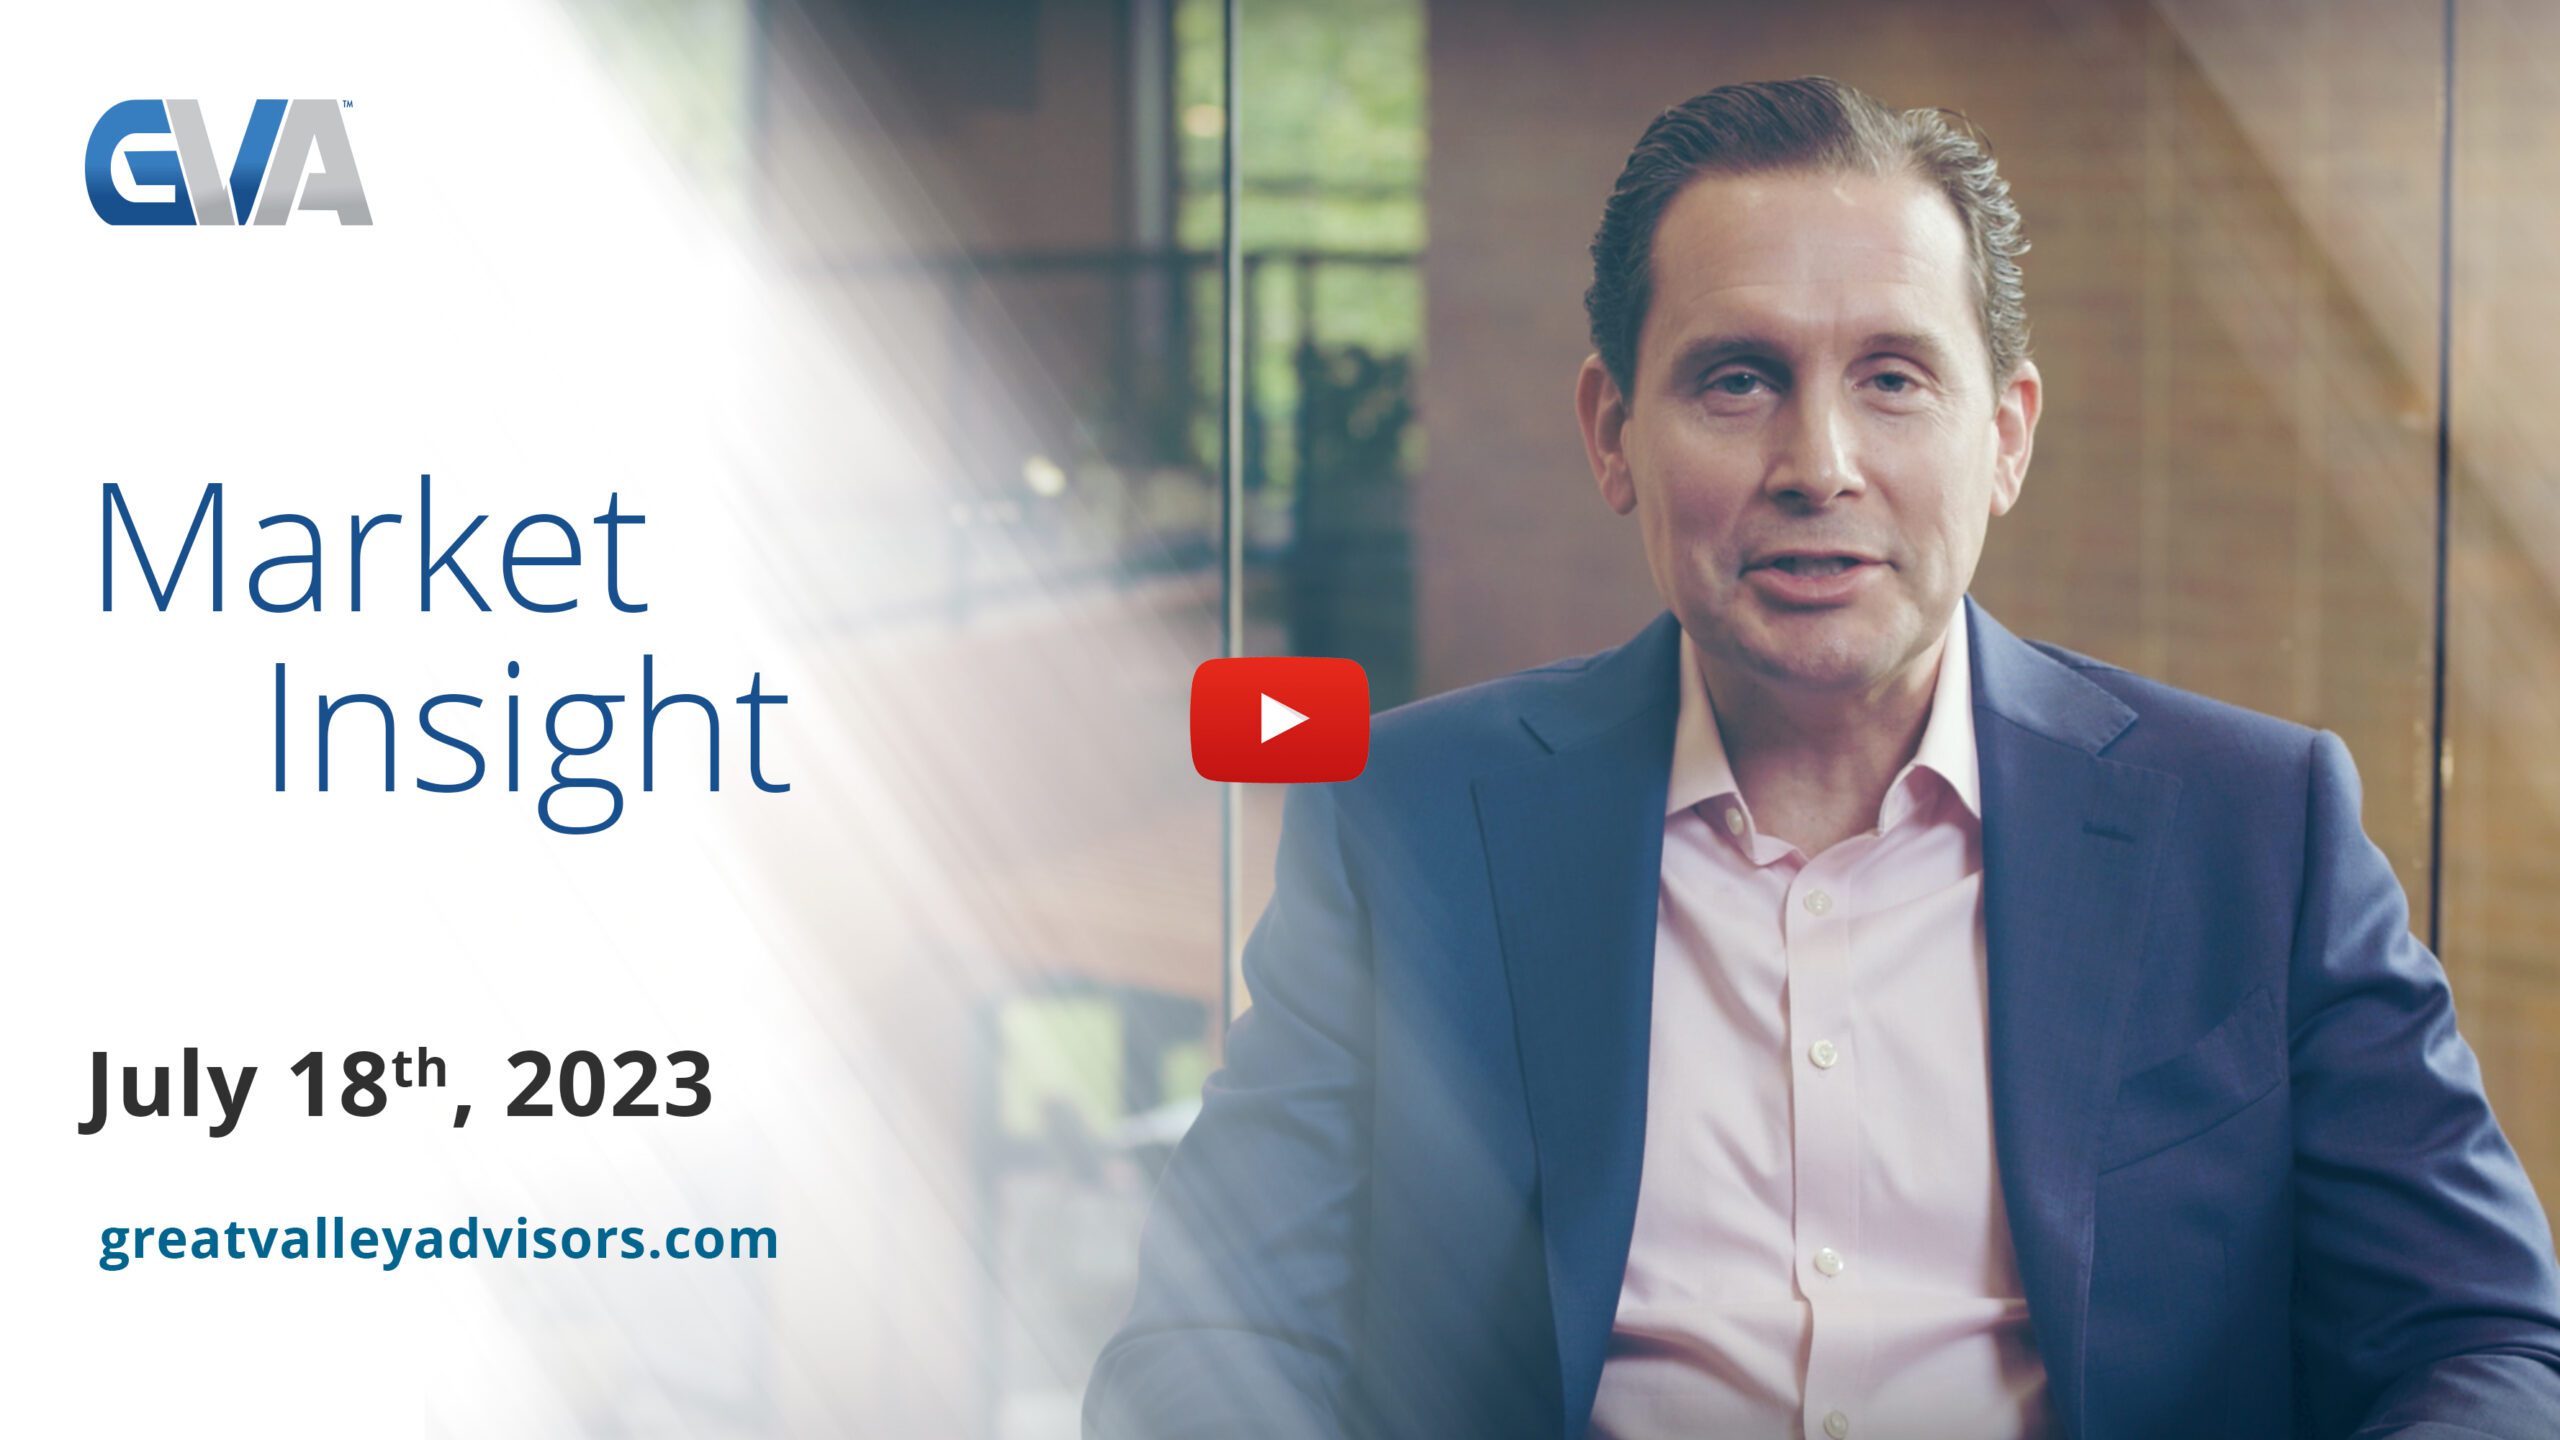 Market Insights with Eric: Episode 5, July 18th, 2023